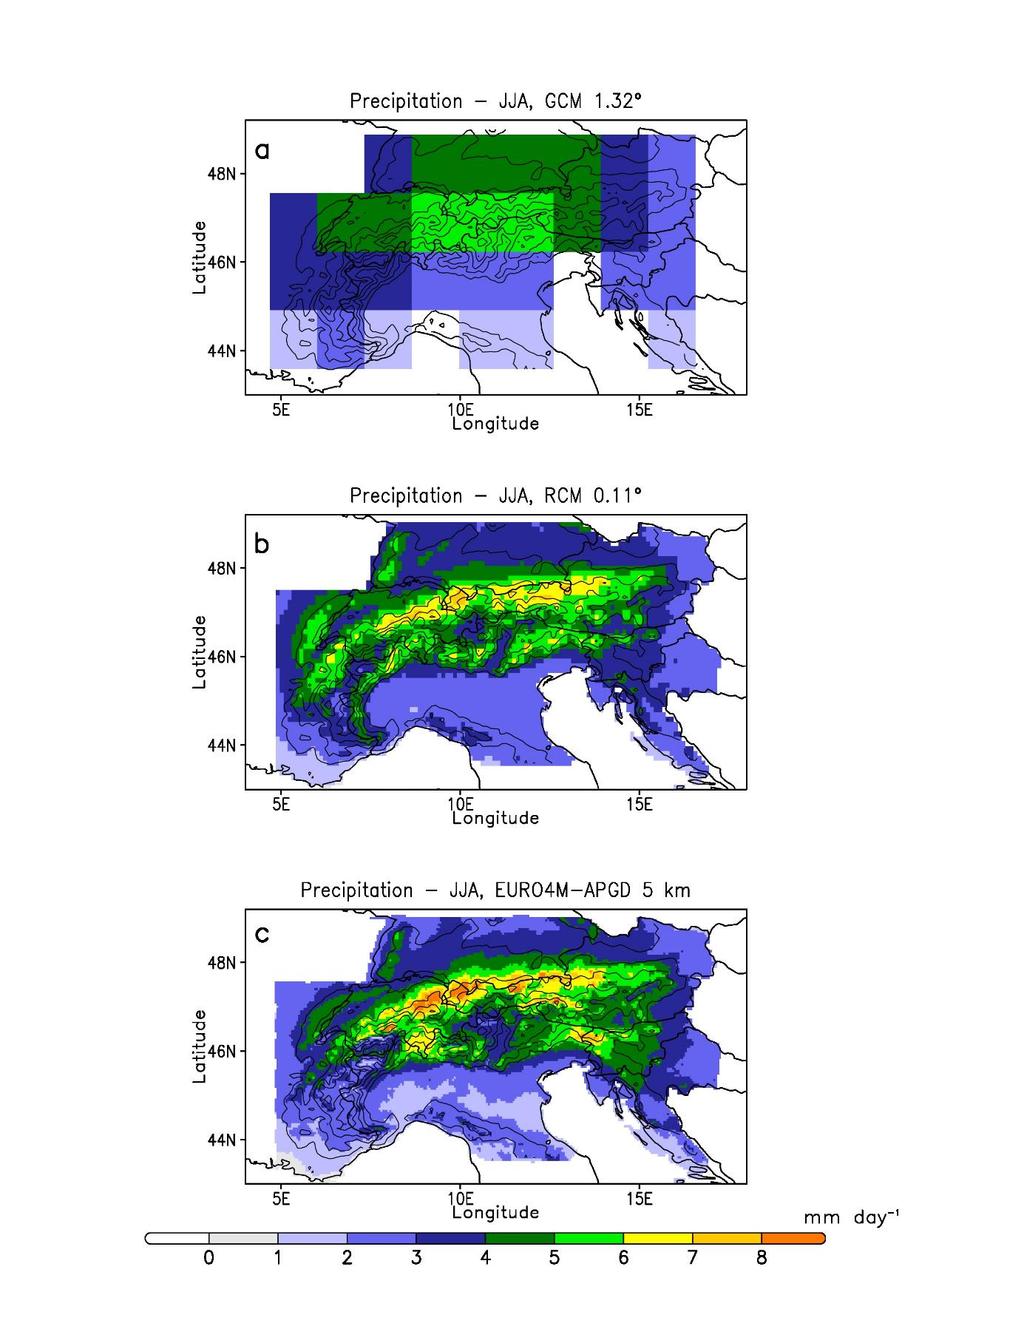 Supplementary Figure 2. Mean summer precipitation during the reference period (June- July-August, 1975-2004).